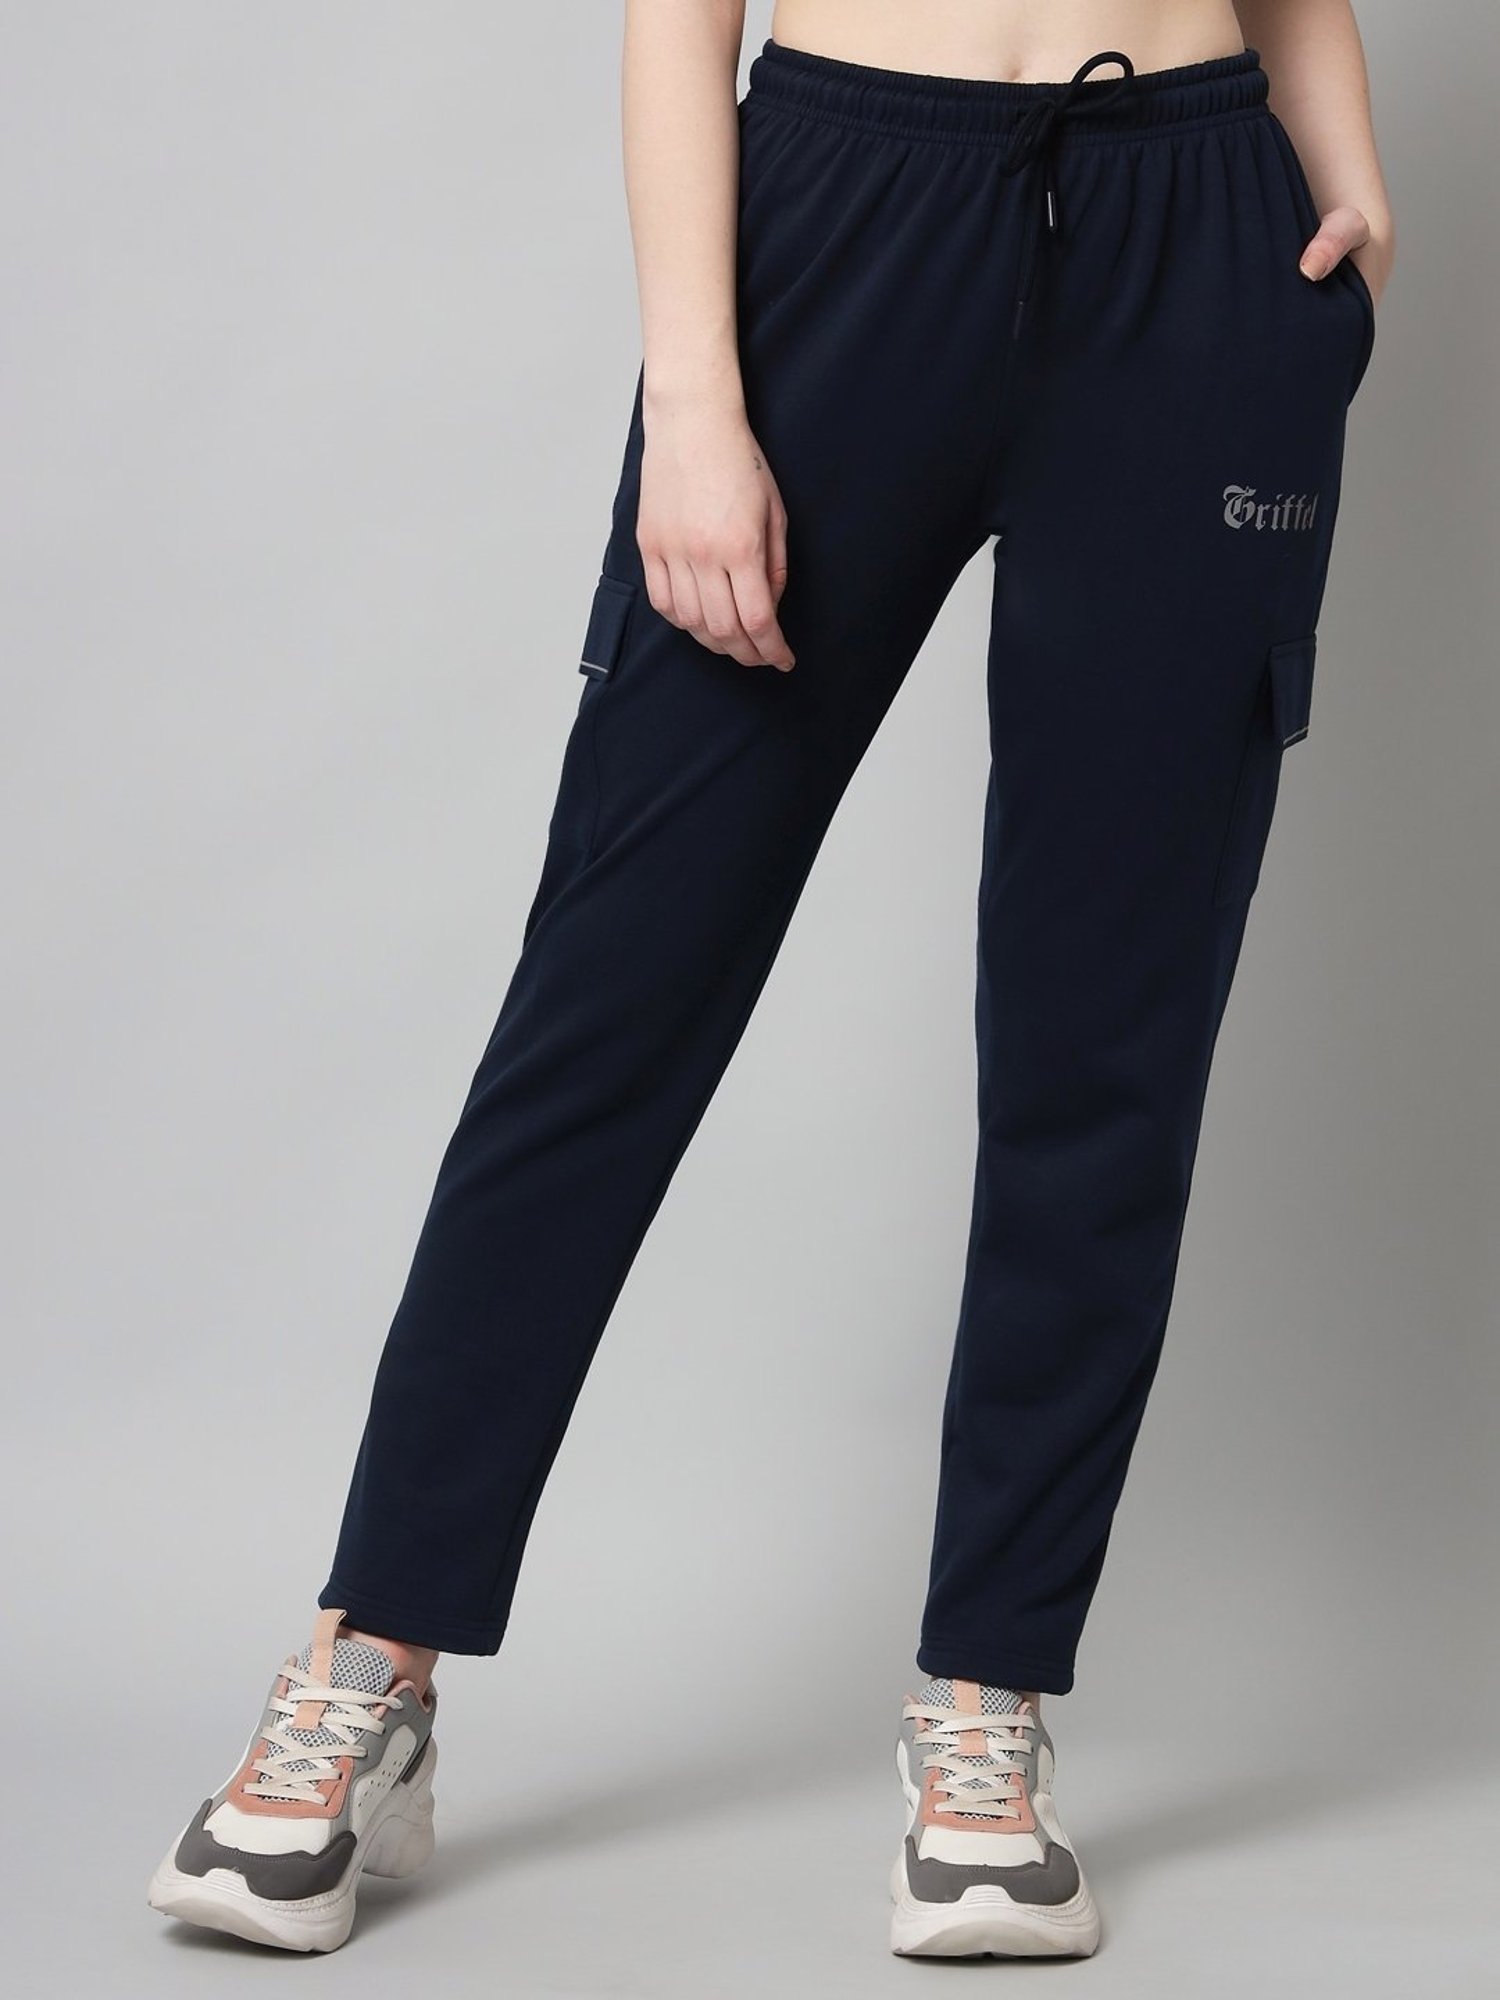 Athleisure trend how to wear track pants  Mademoiselle Jules